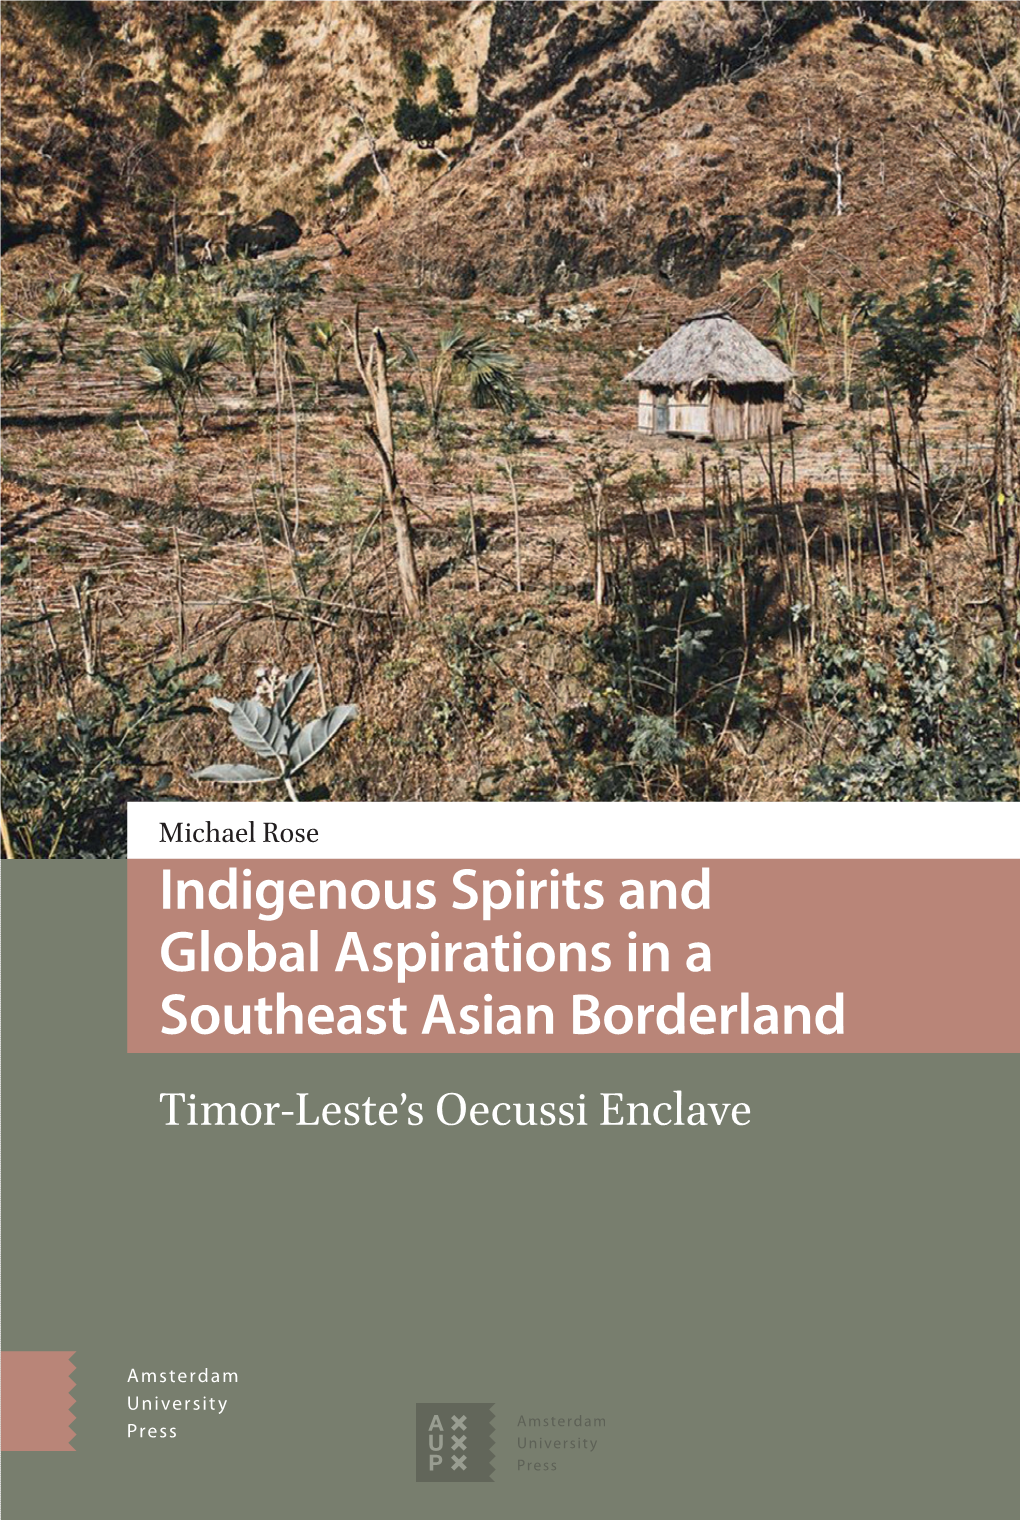 Indigenous Spirits and Global Aspirations in a Southeast Asian